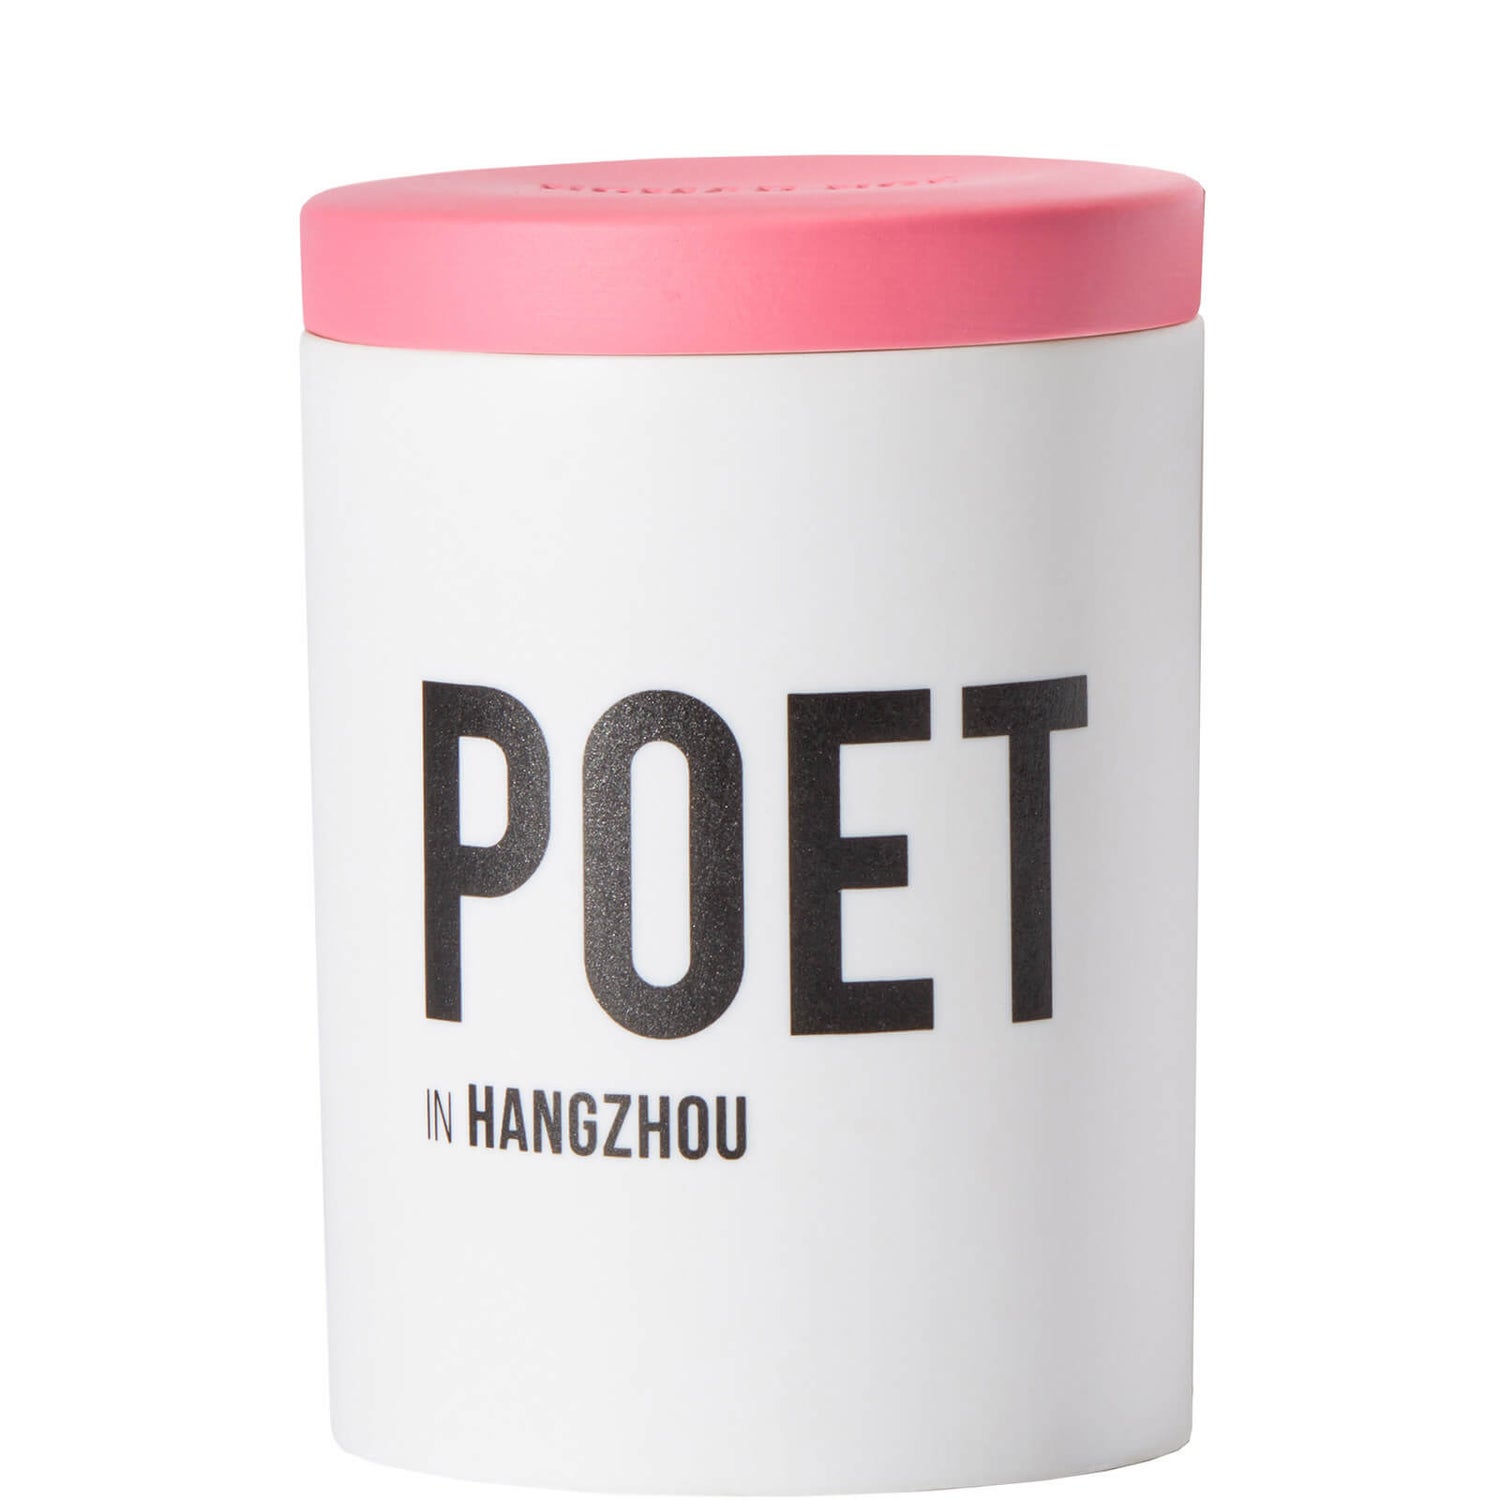 Nomad Noé Poet in Hangzhou - Bamboo and Tuberose